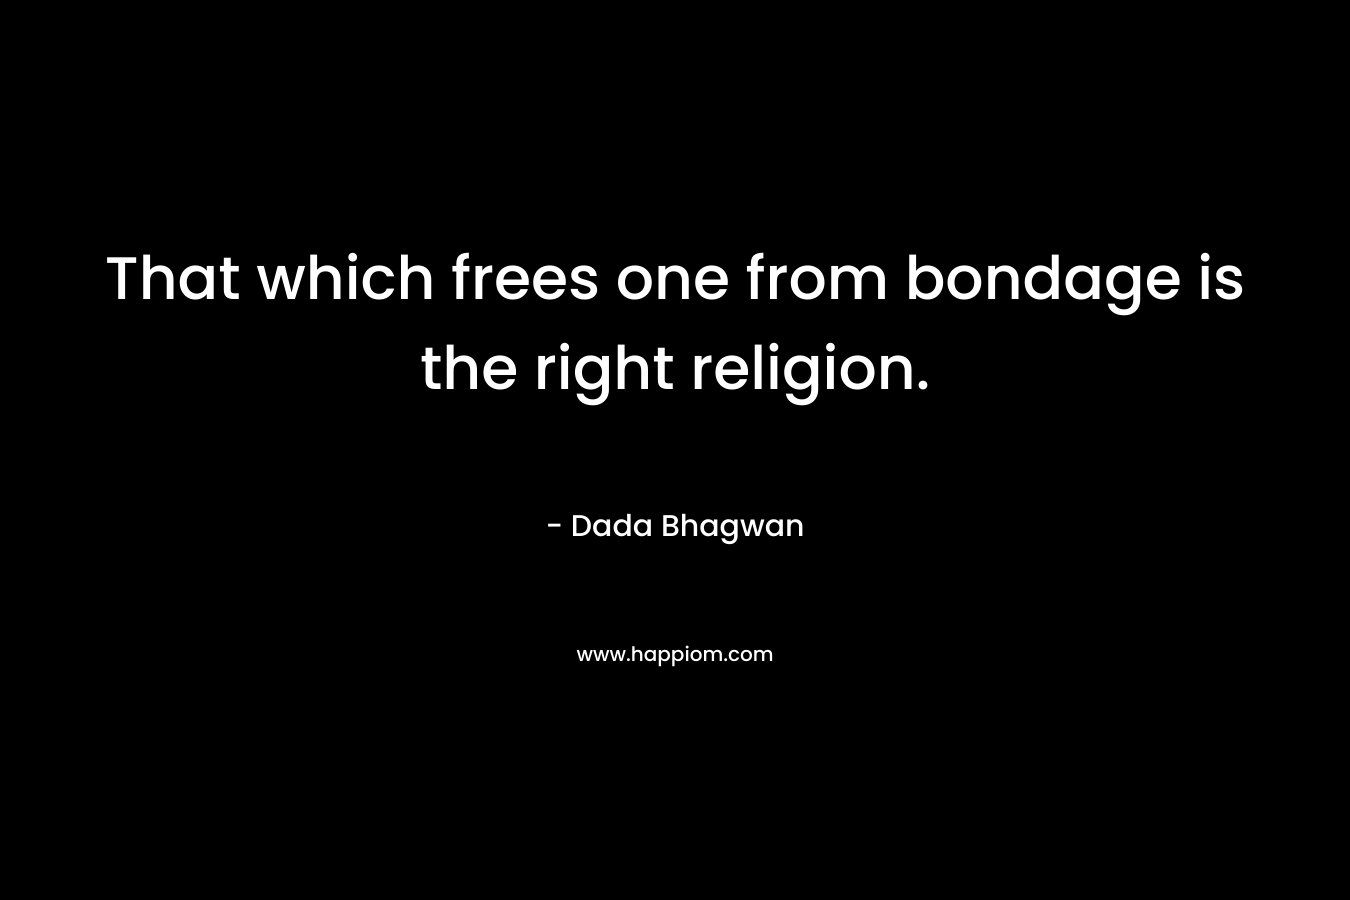 That which frees one from bondage is the right religion. – Dada Bhagwan